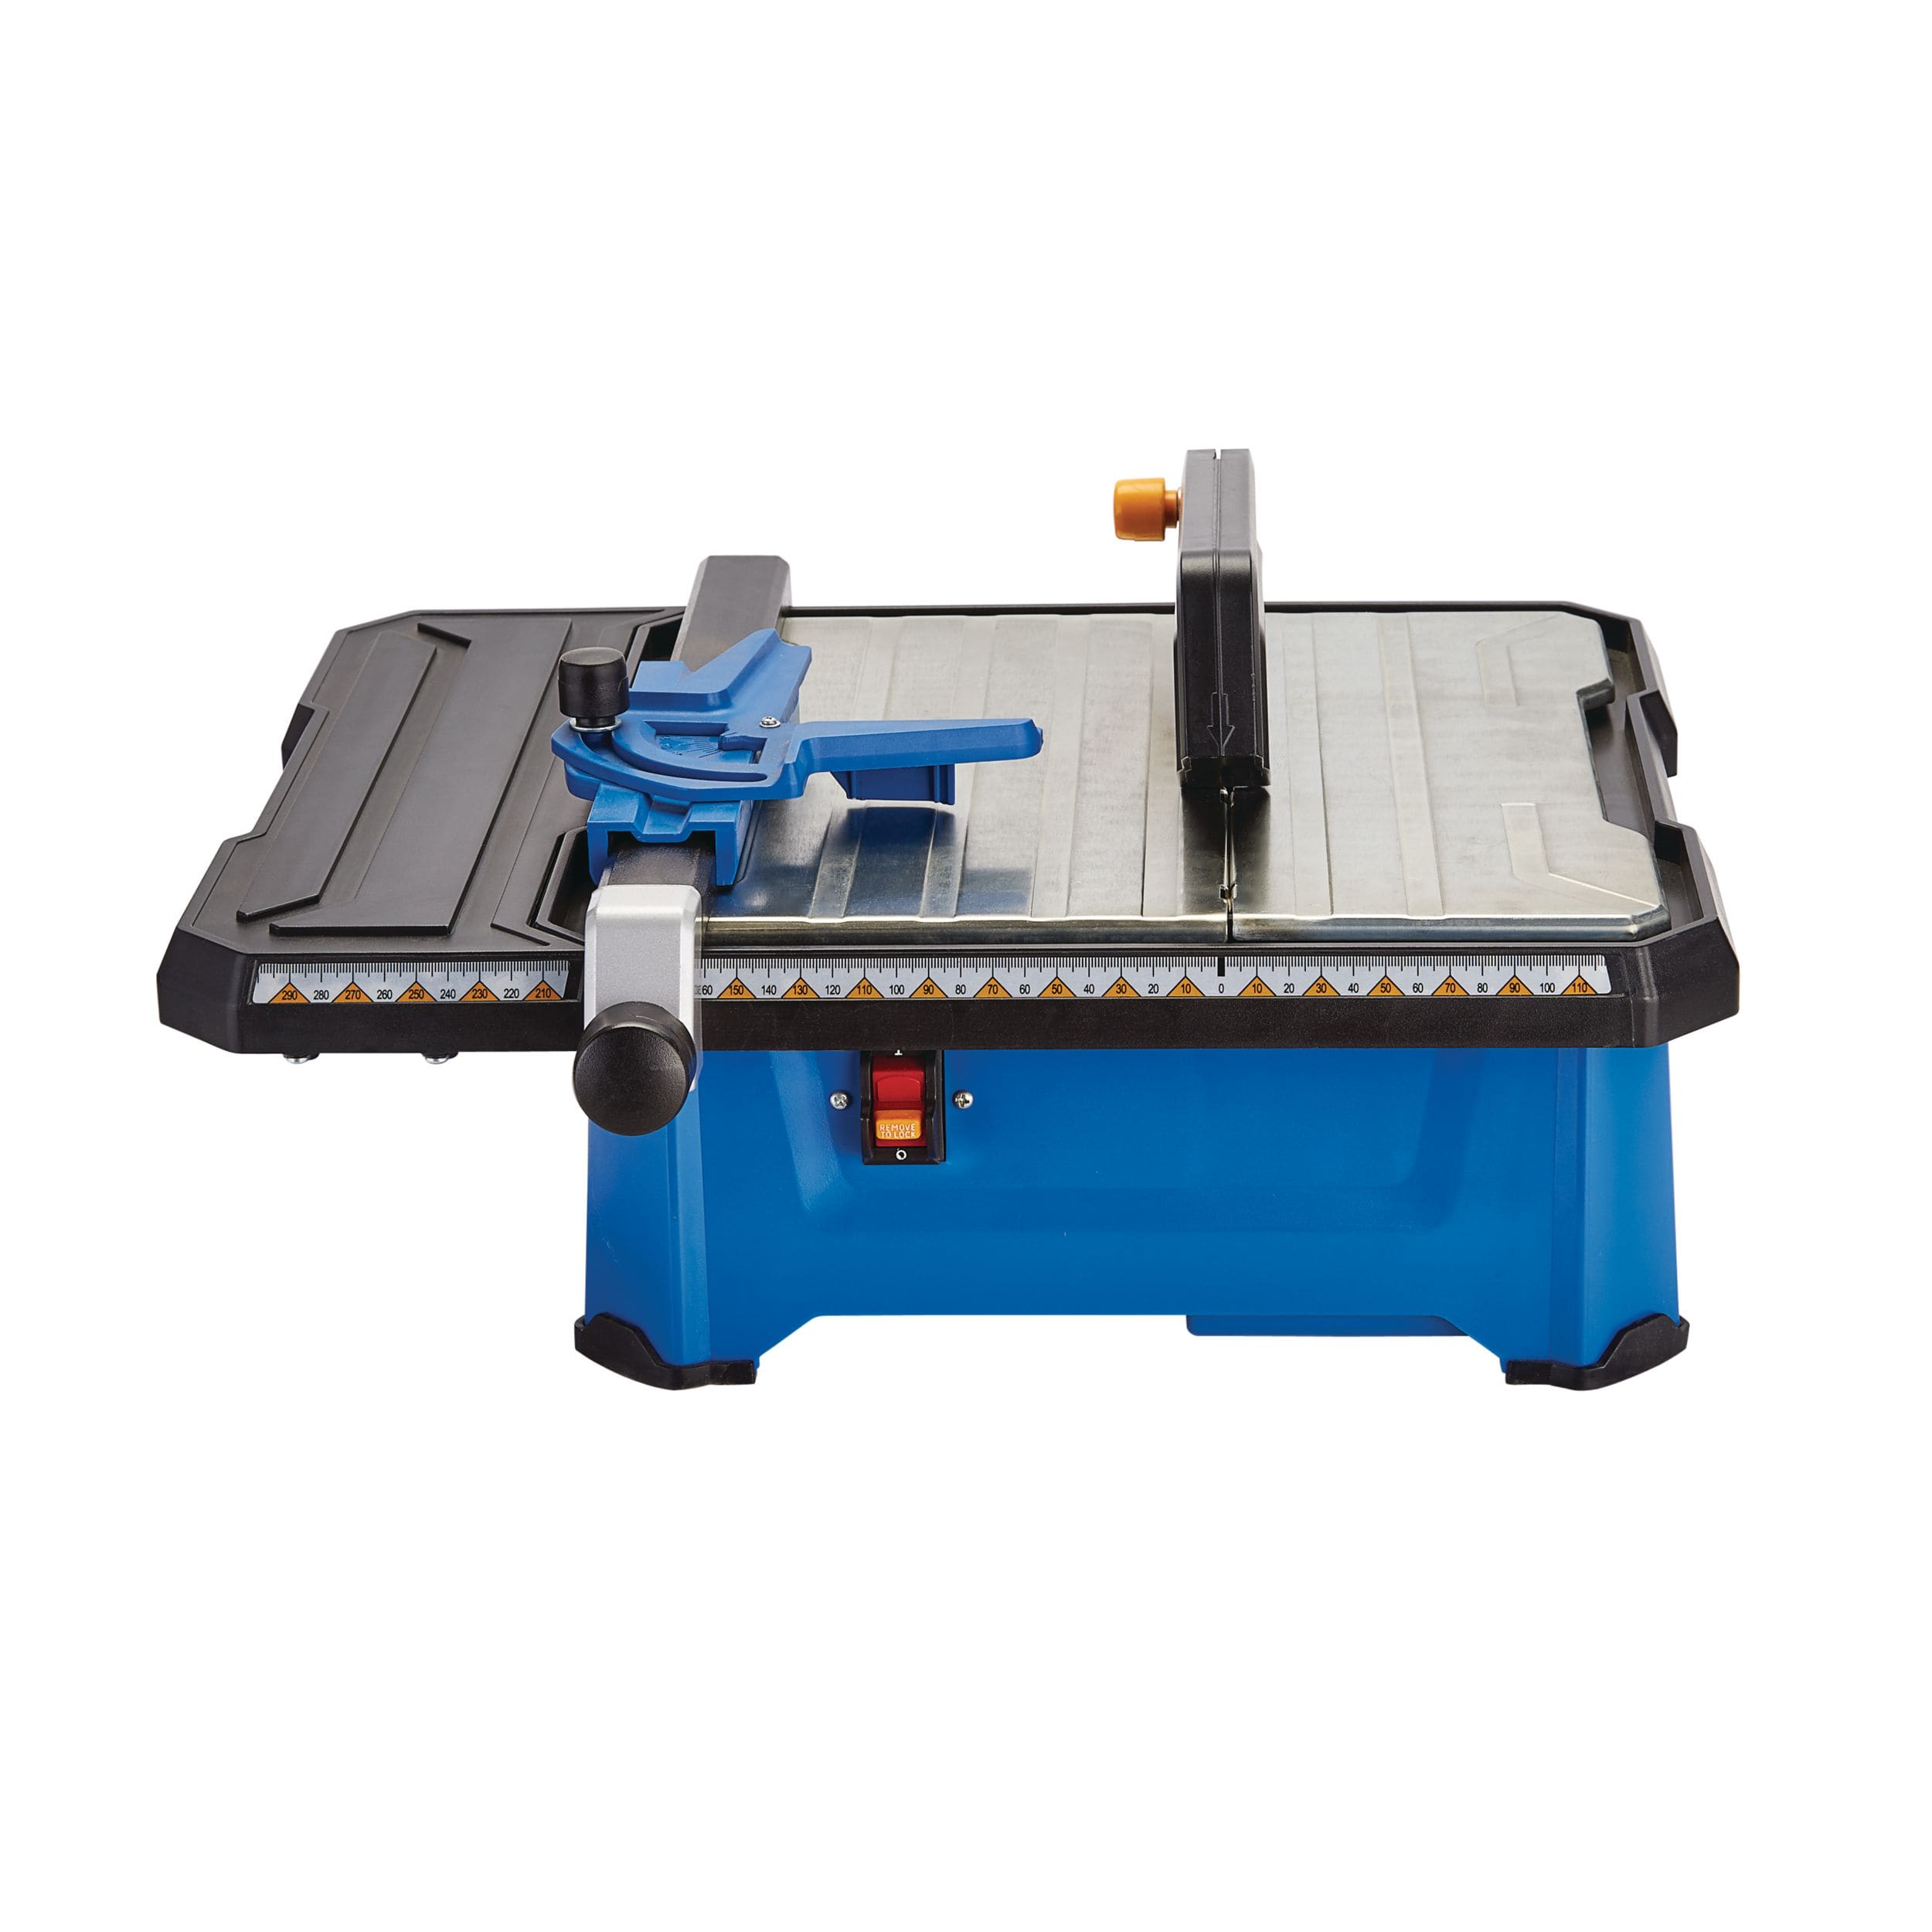 Mastercraft Amp Wet Tile Saw, 7-in Canadian Tire